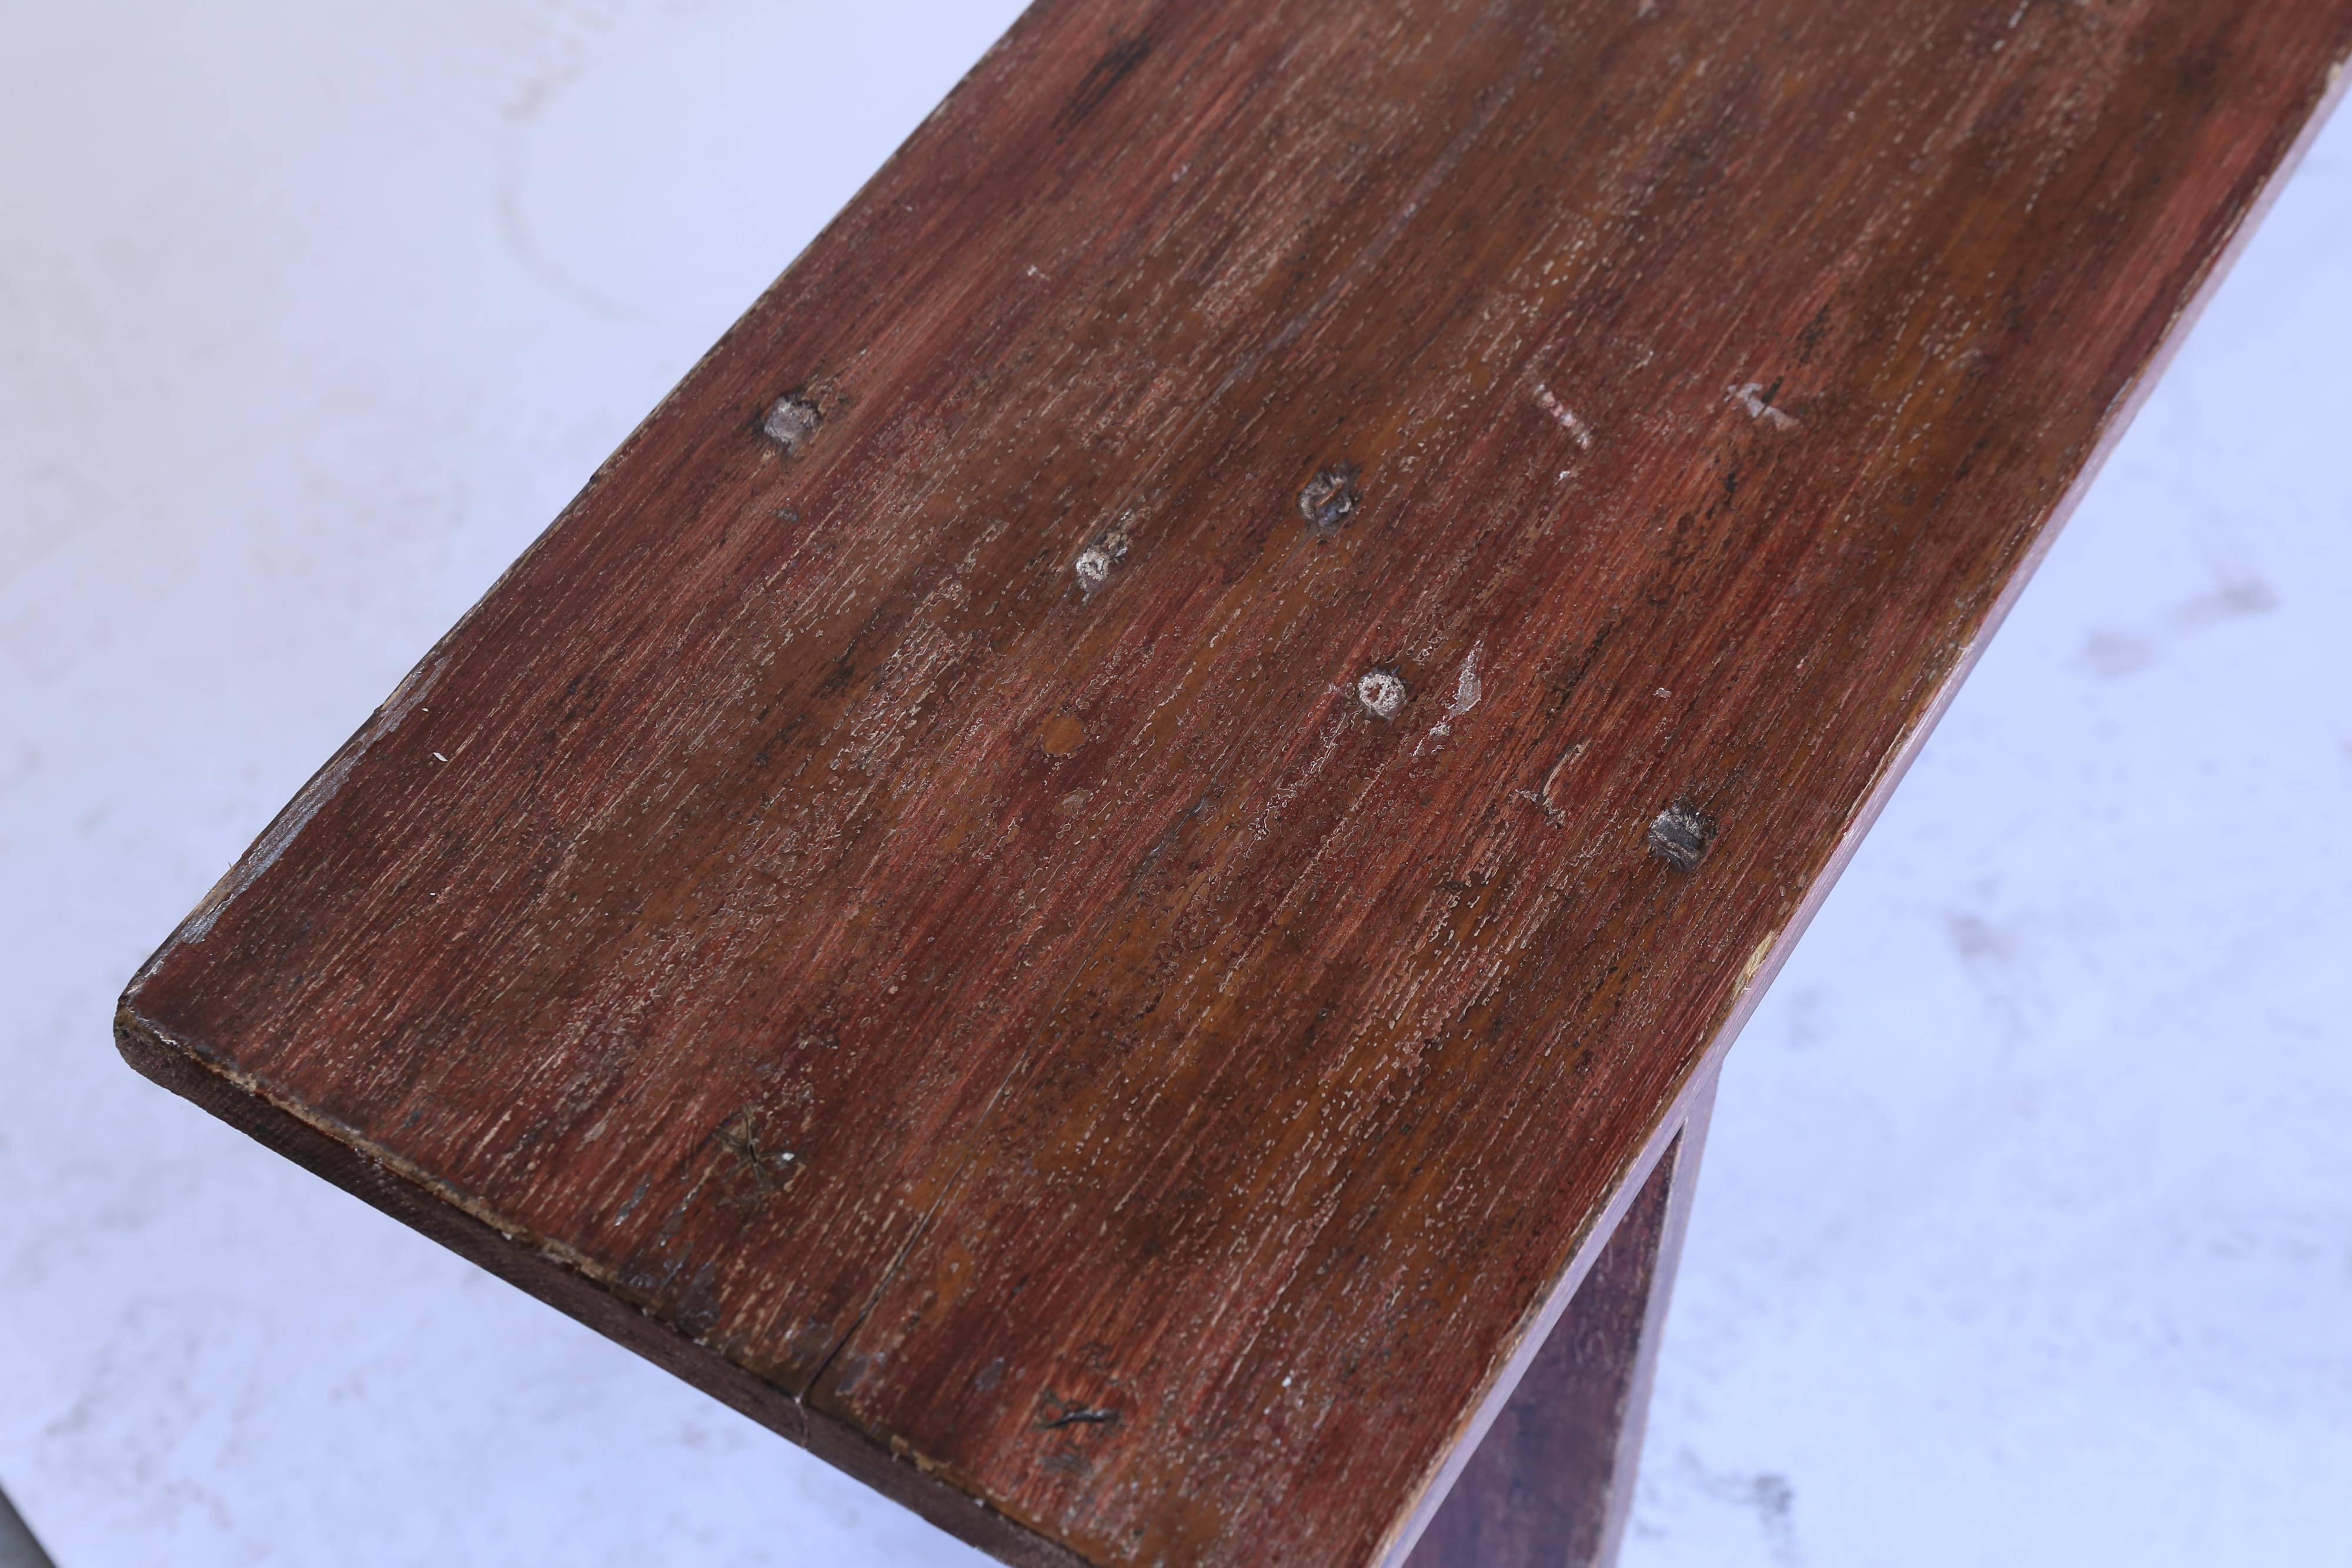 A 9 foot long wooden bench with a red oak stain from France. Solid and sturdy. Two are available.